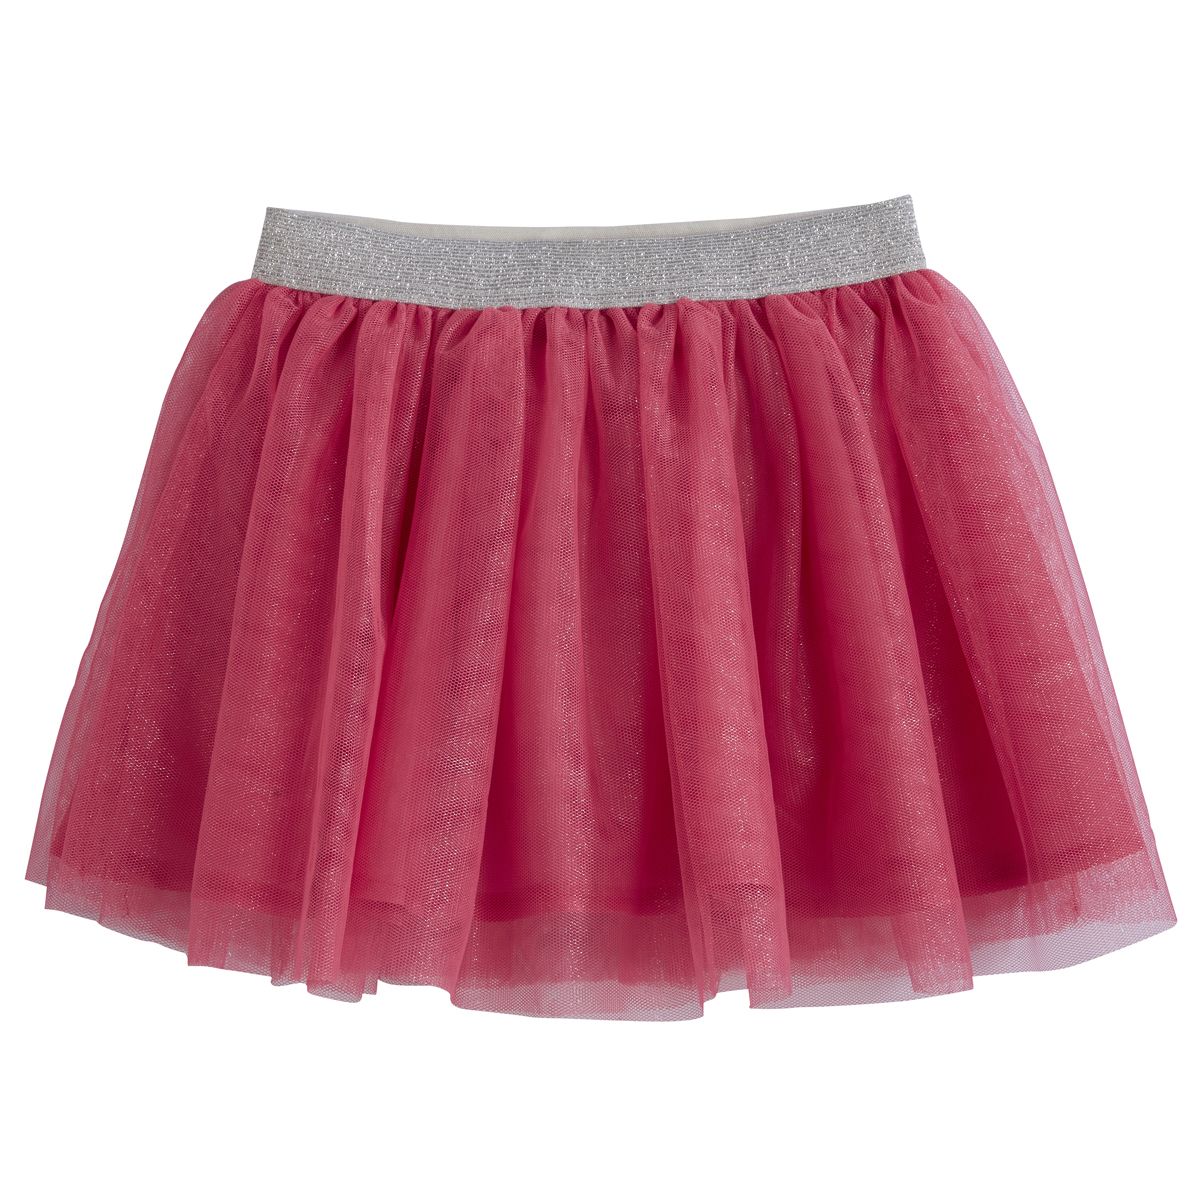 IN EXTENSO Jupe tulle fille pas cher - Auchan.fr